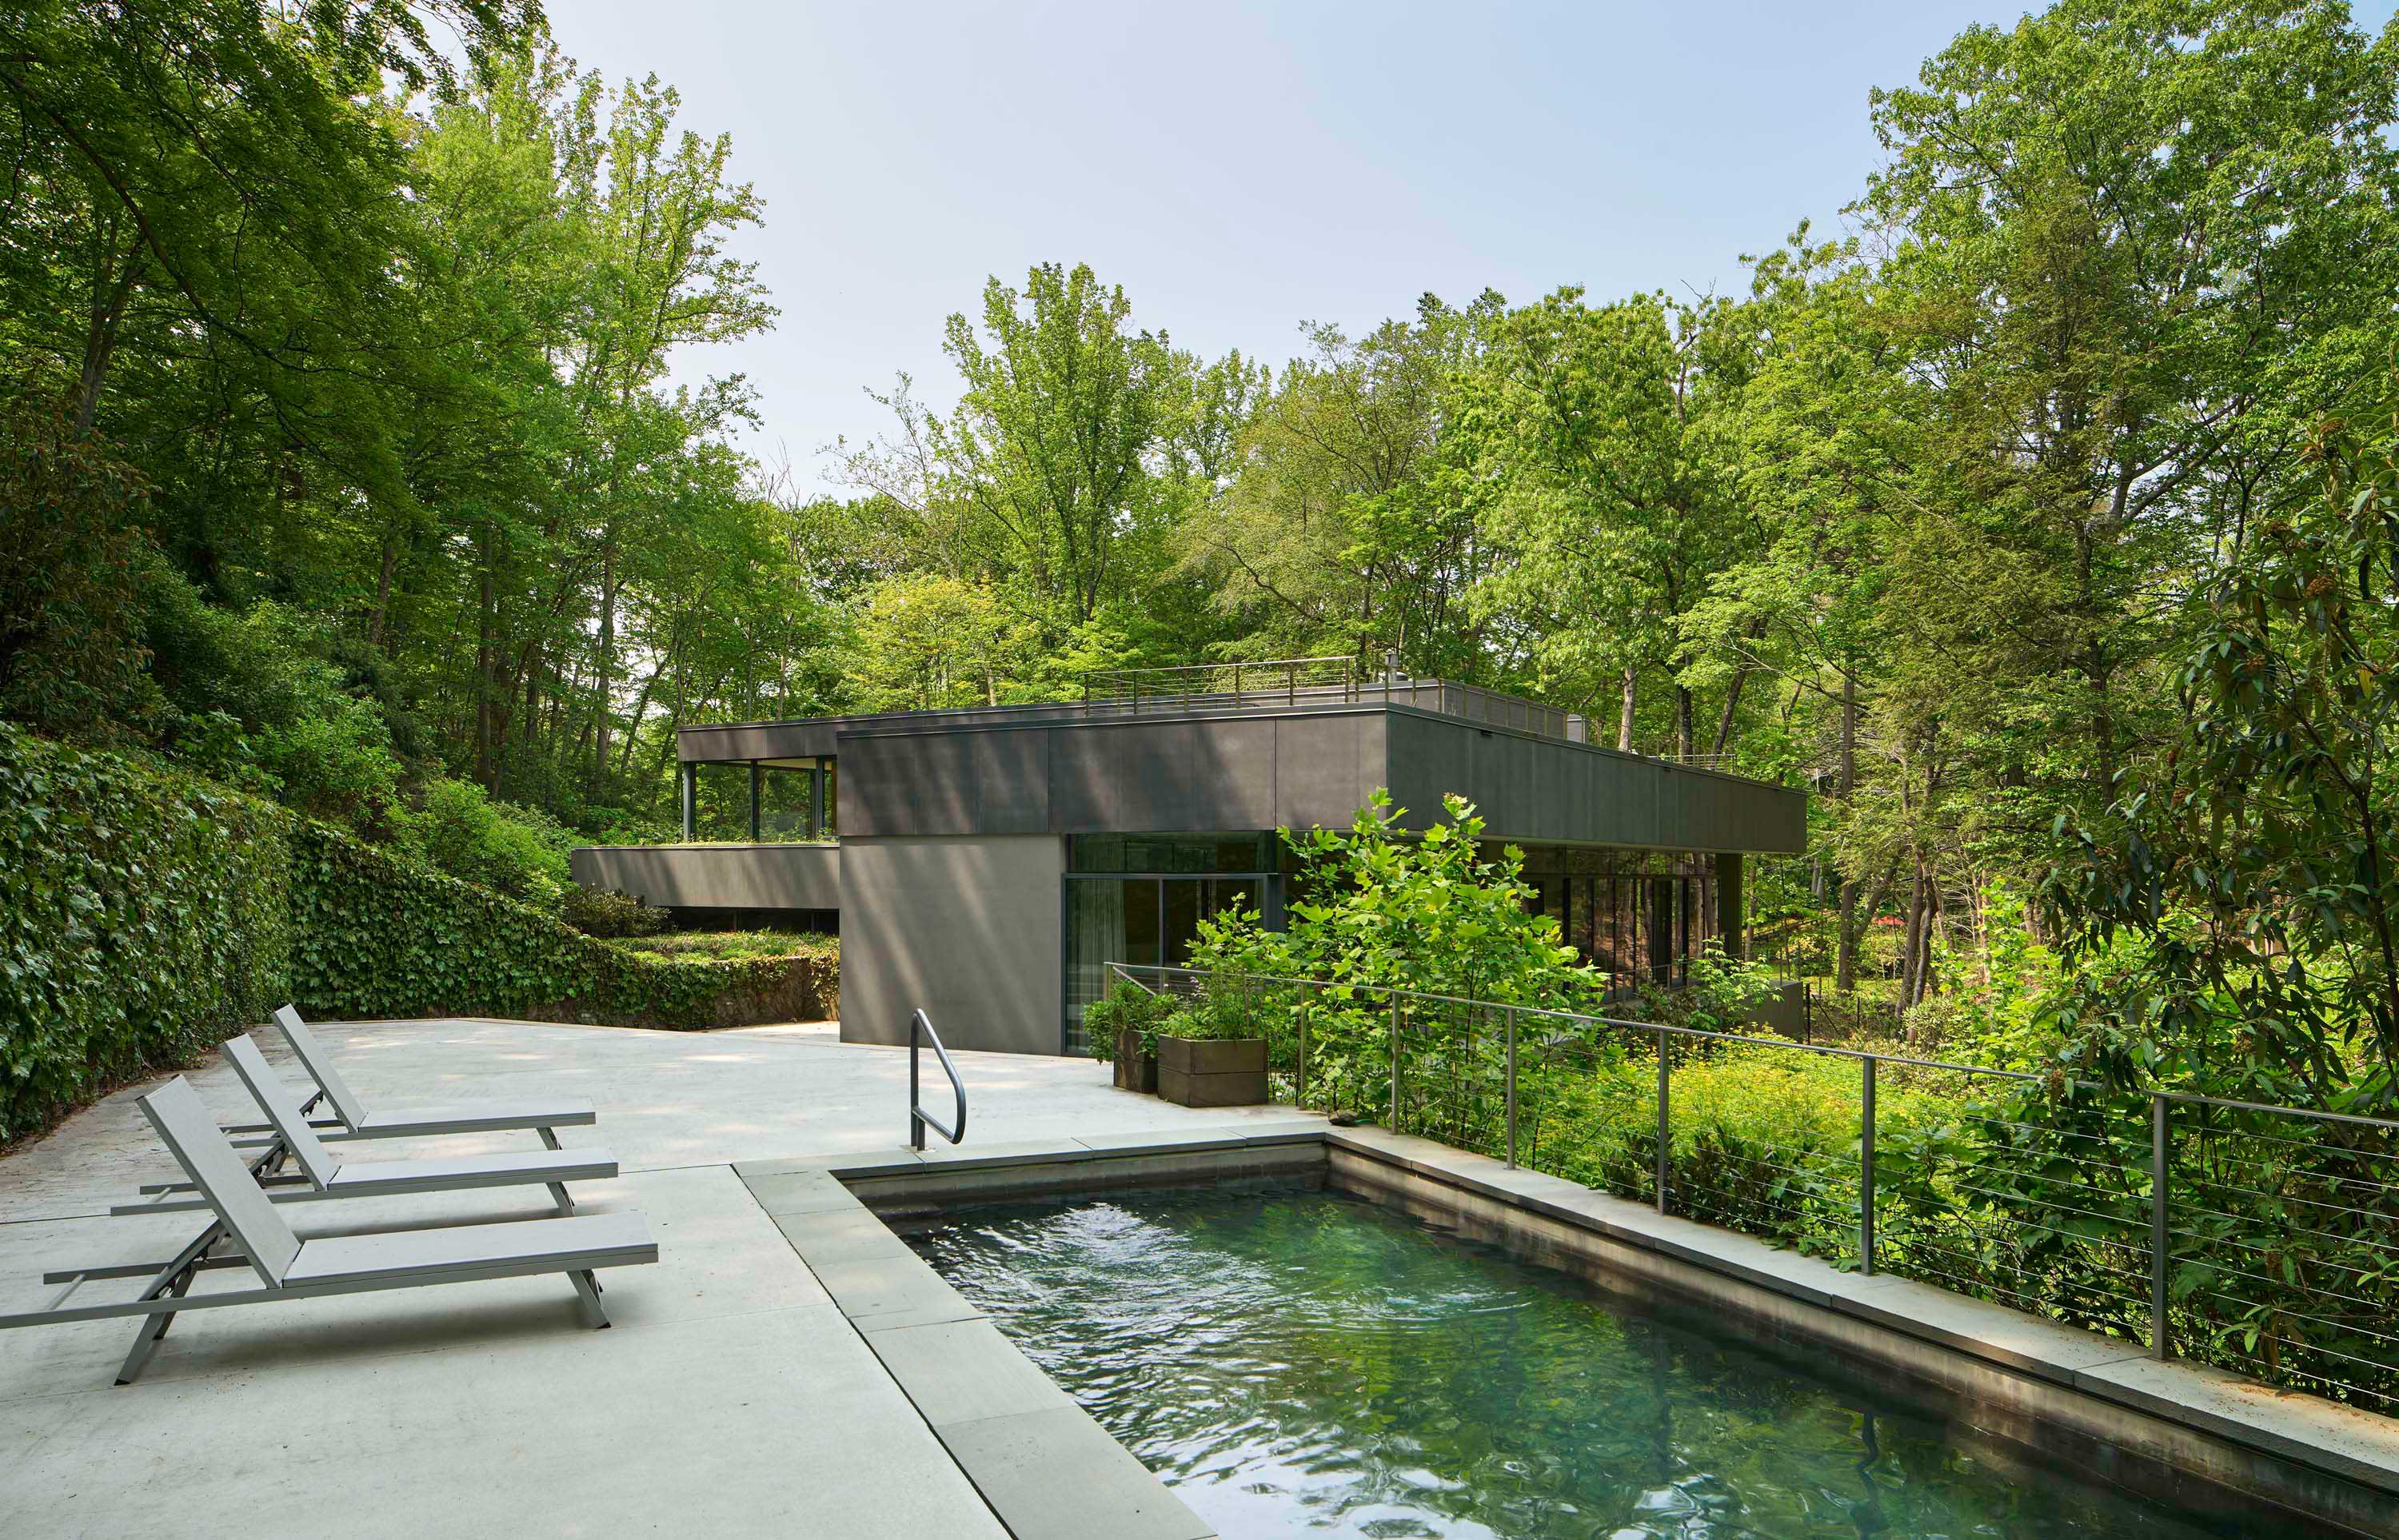 Exterior photo of Weston Residence by Specht Novak Architects. Shot by Jasper Lazor, featuring the concrete and glass home from the pool lounging area surrounded by greenery.